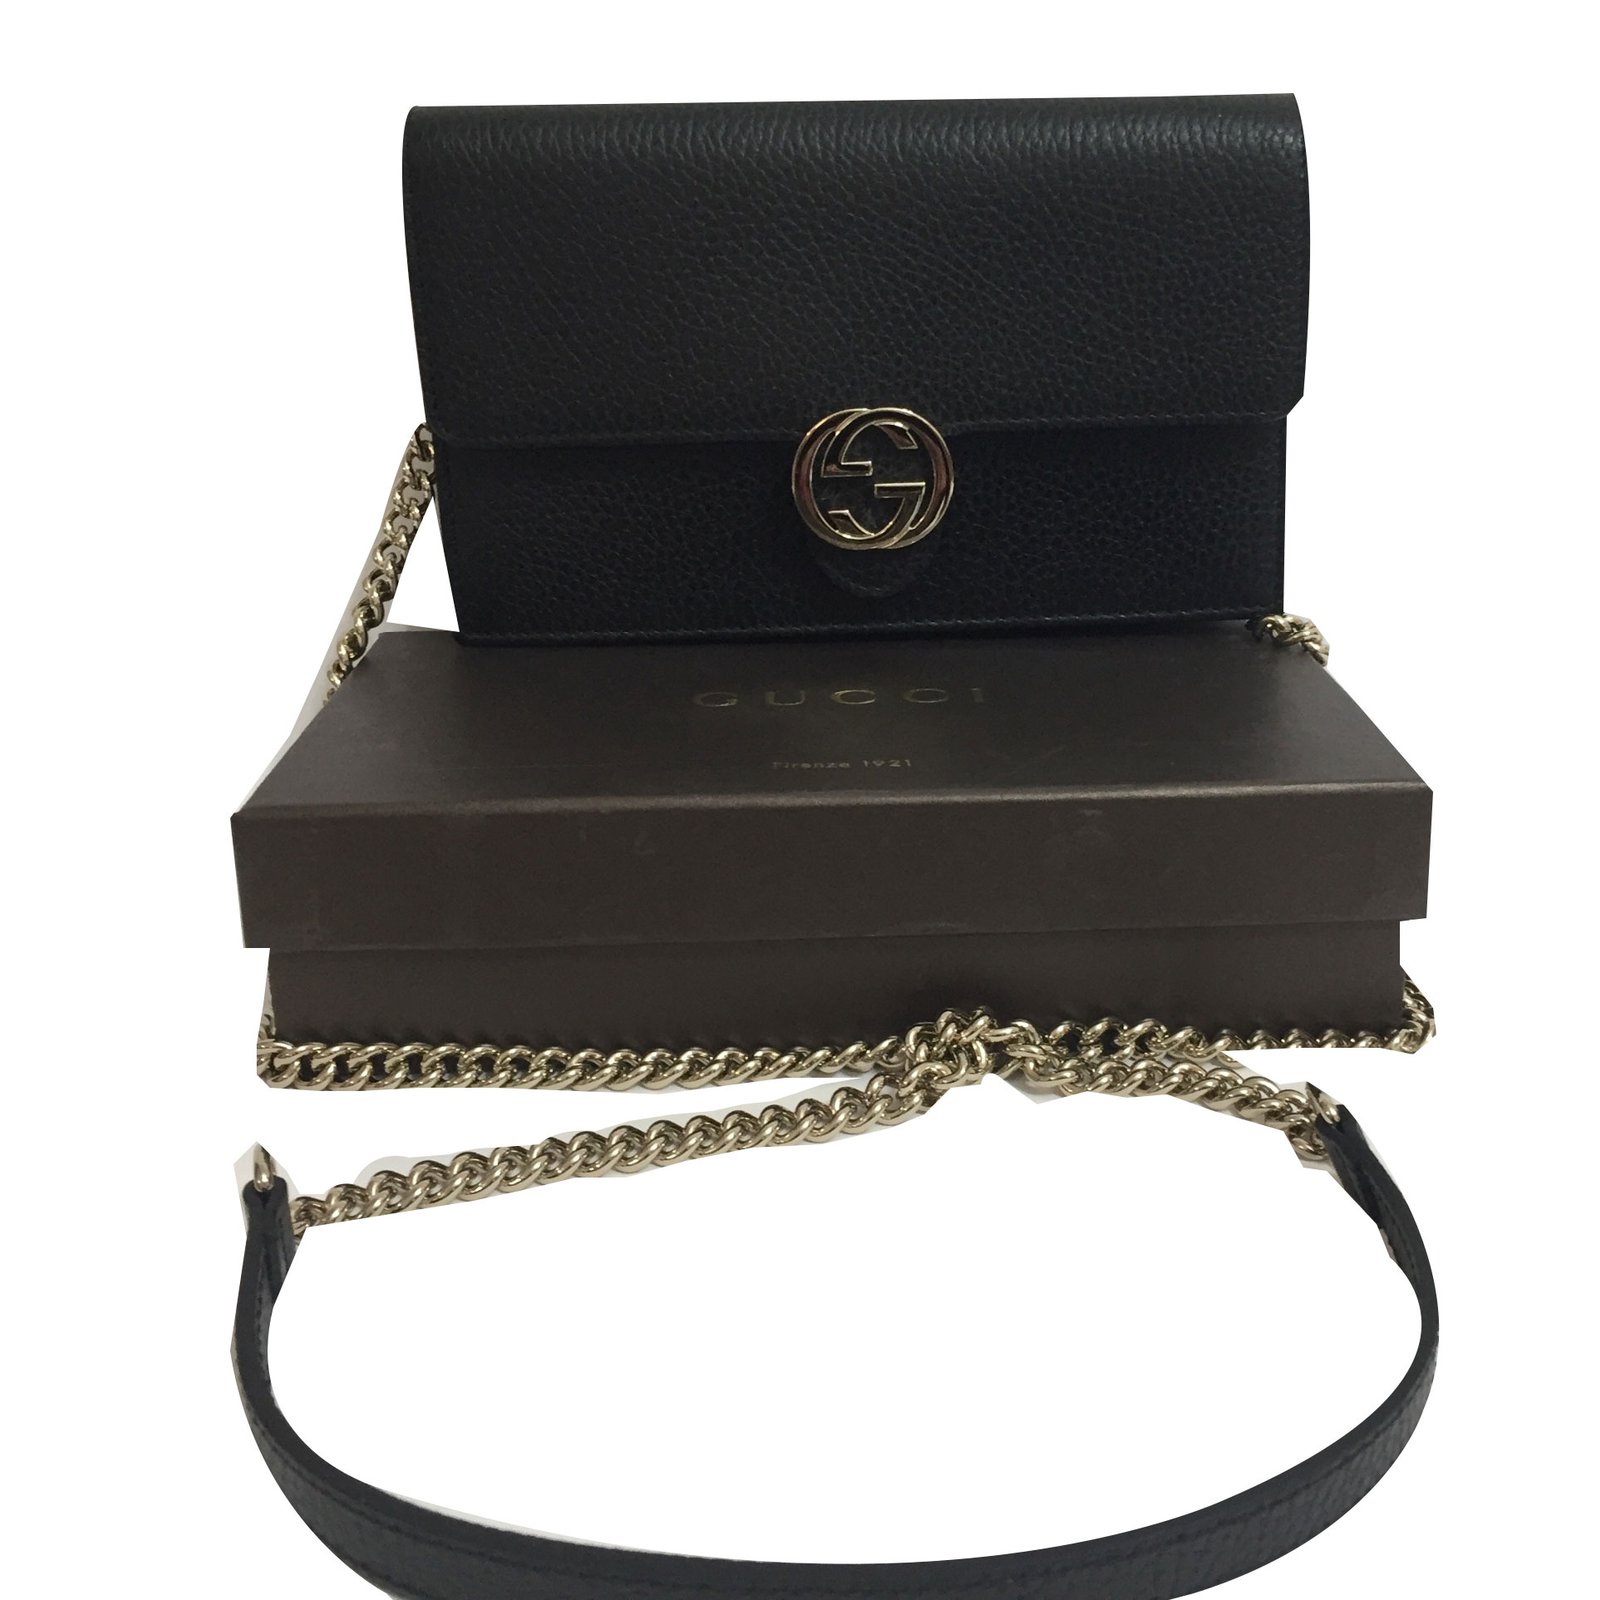 gucci wallet on chain black